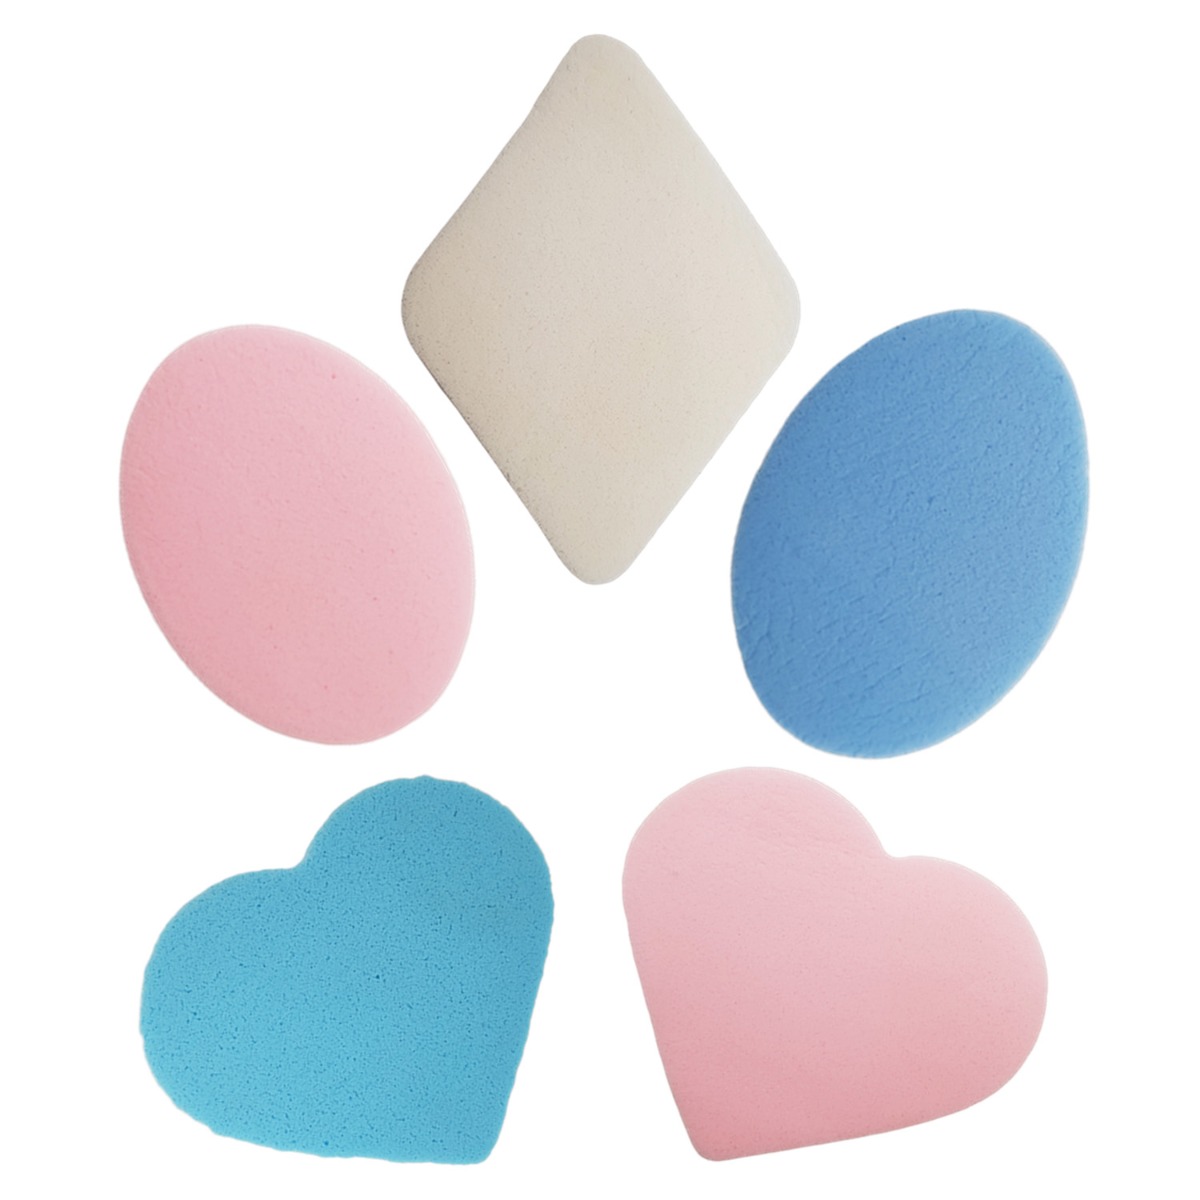 Majestique Facial Bath Cleansing Sponges for Aging Skin Cleaning, Makeup Remover - Pack of 5